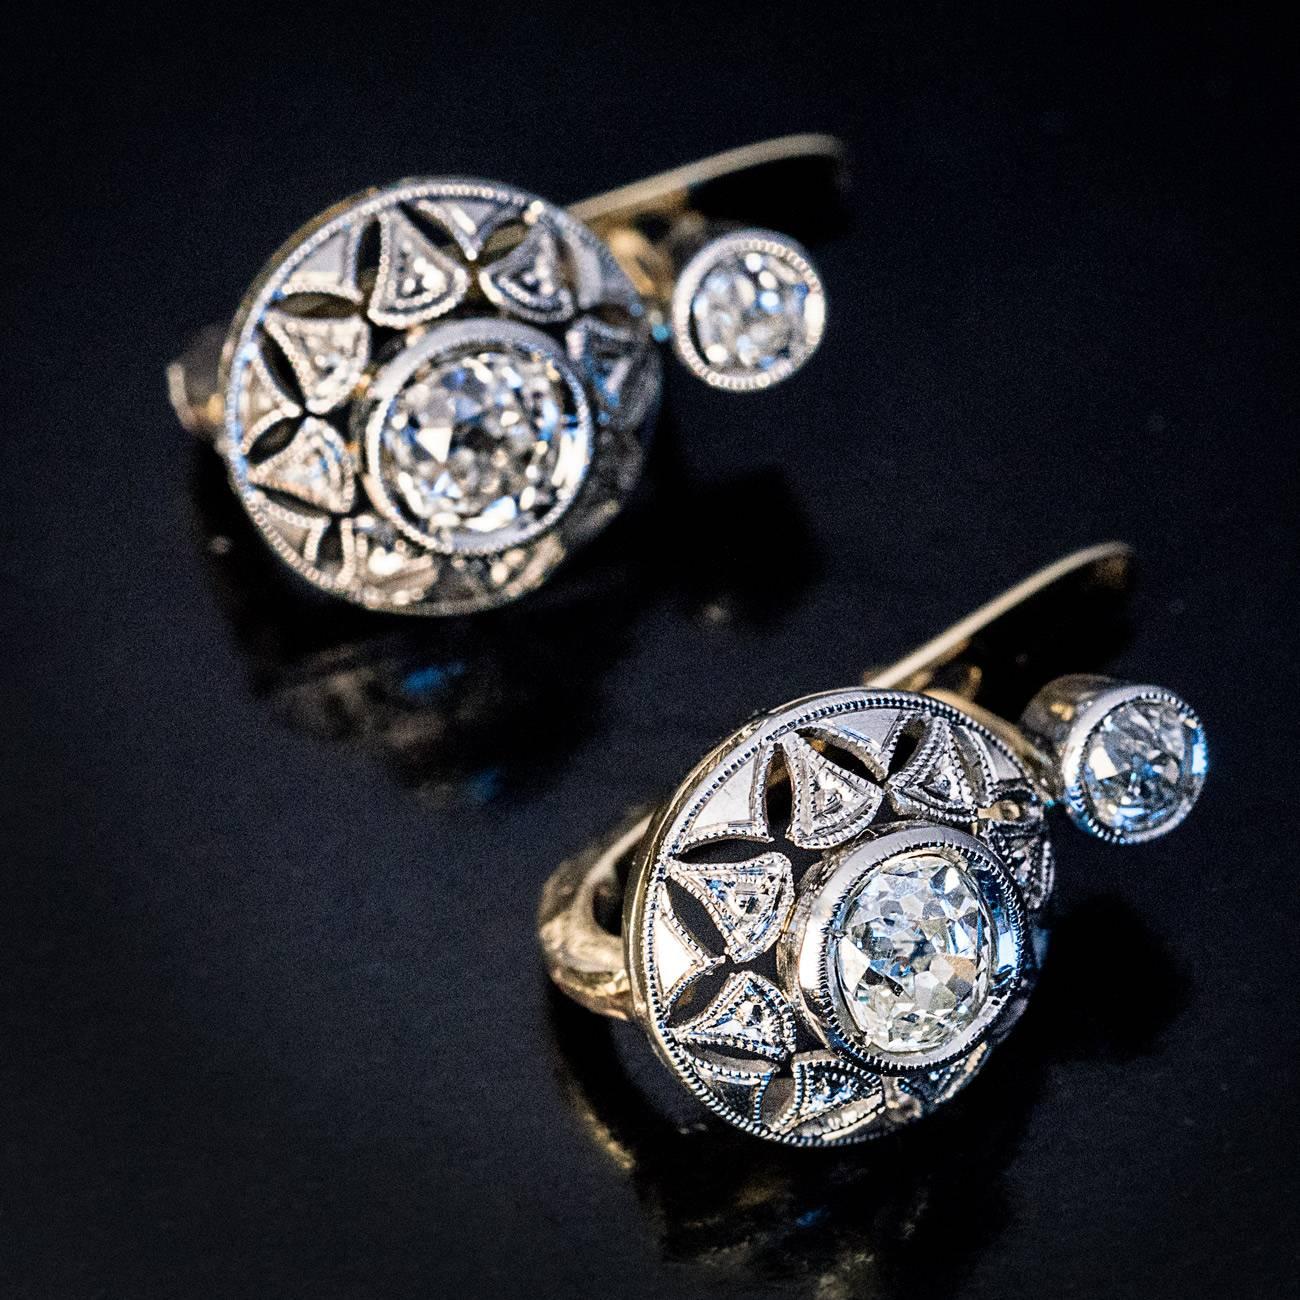 Early Art Deco, circa 1915

Antique platinum topped 18K gold earrings with an openwork star pattern are set to the centers with two old cushion cut diamonds: approximately 0.64 ct and 0.60 ct., I-J color, SI clarity., accented by two smaller old